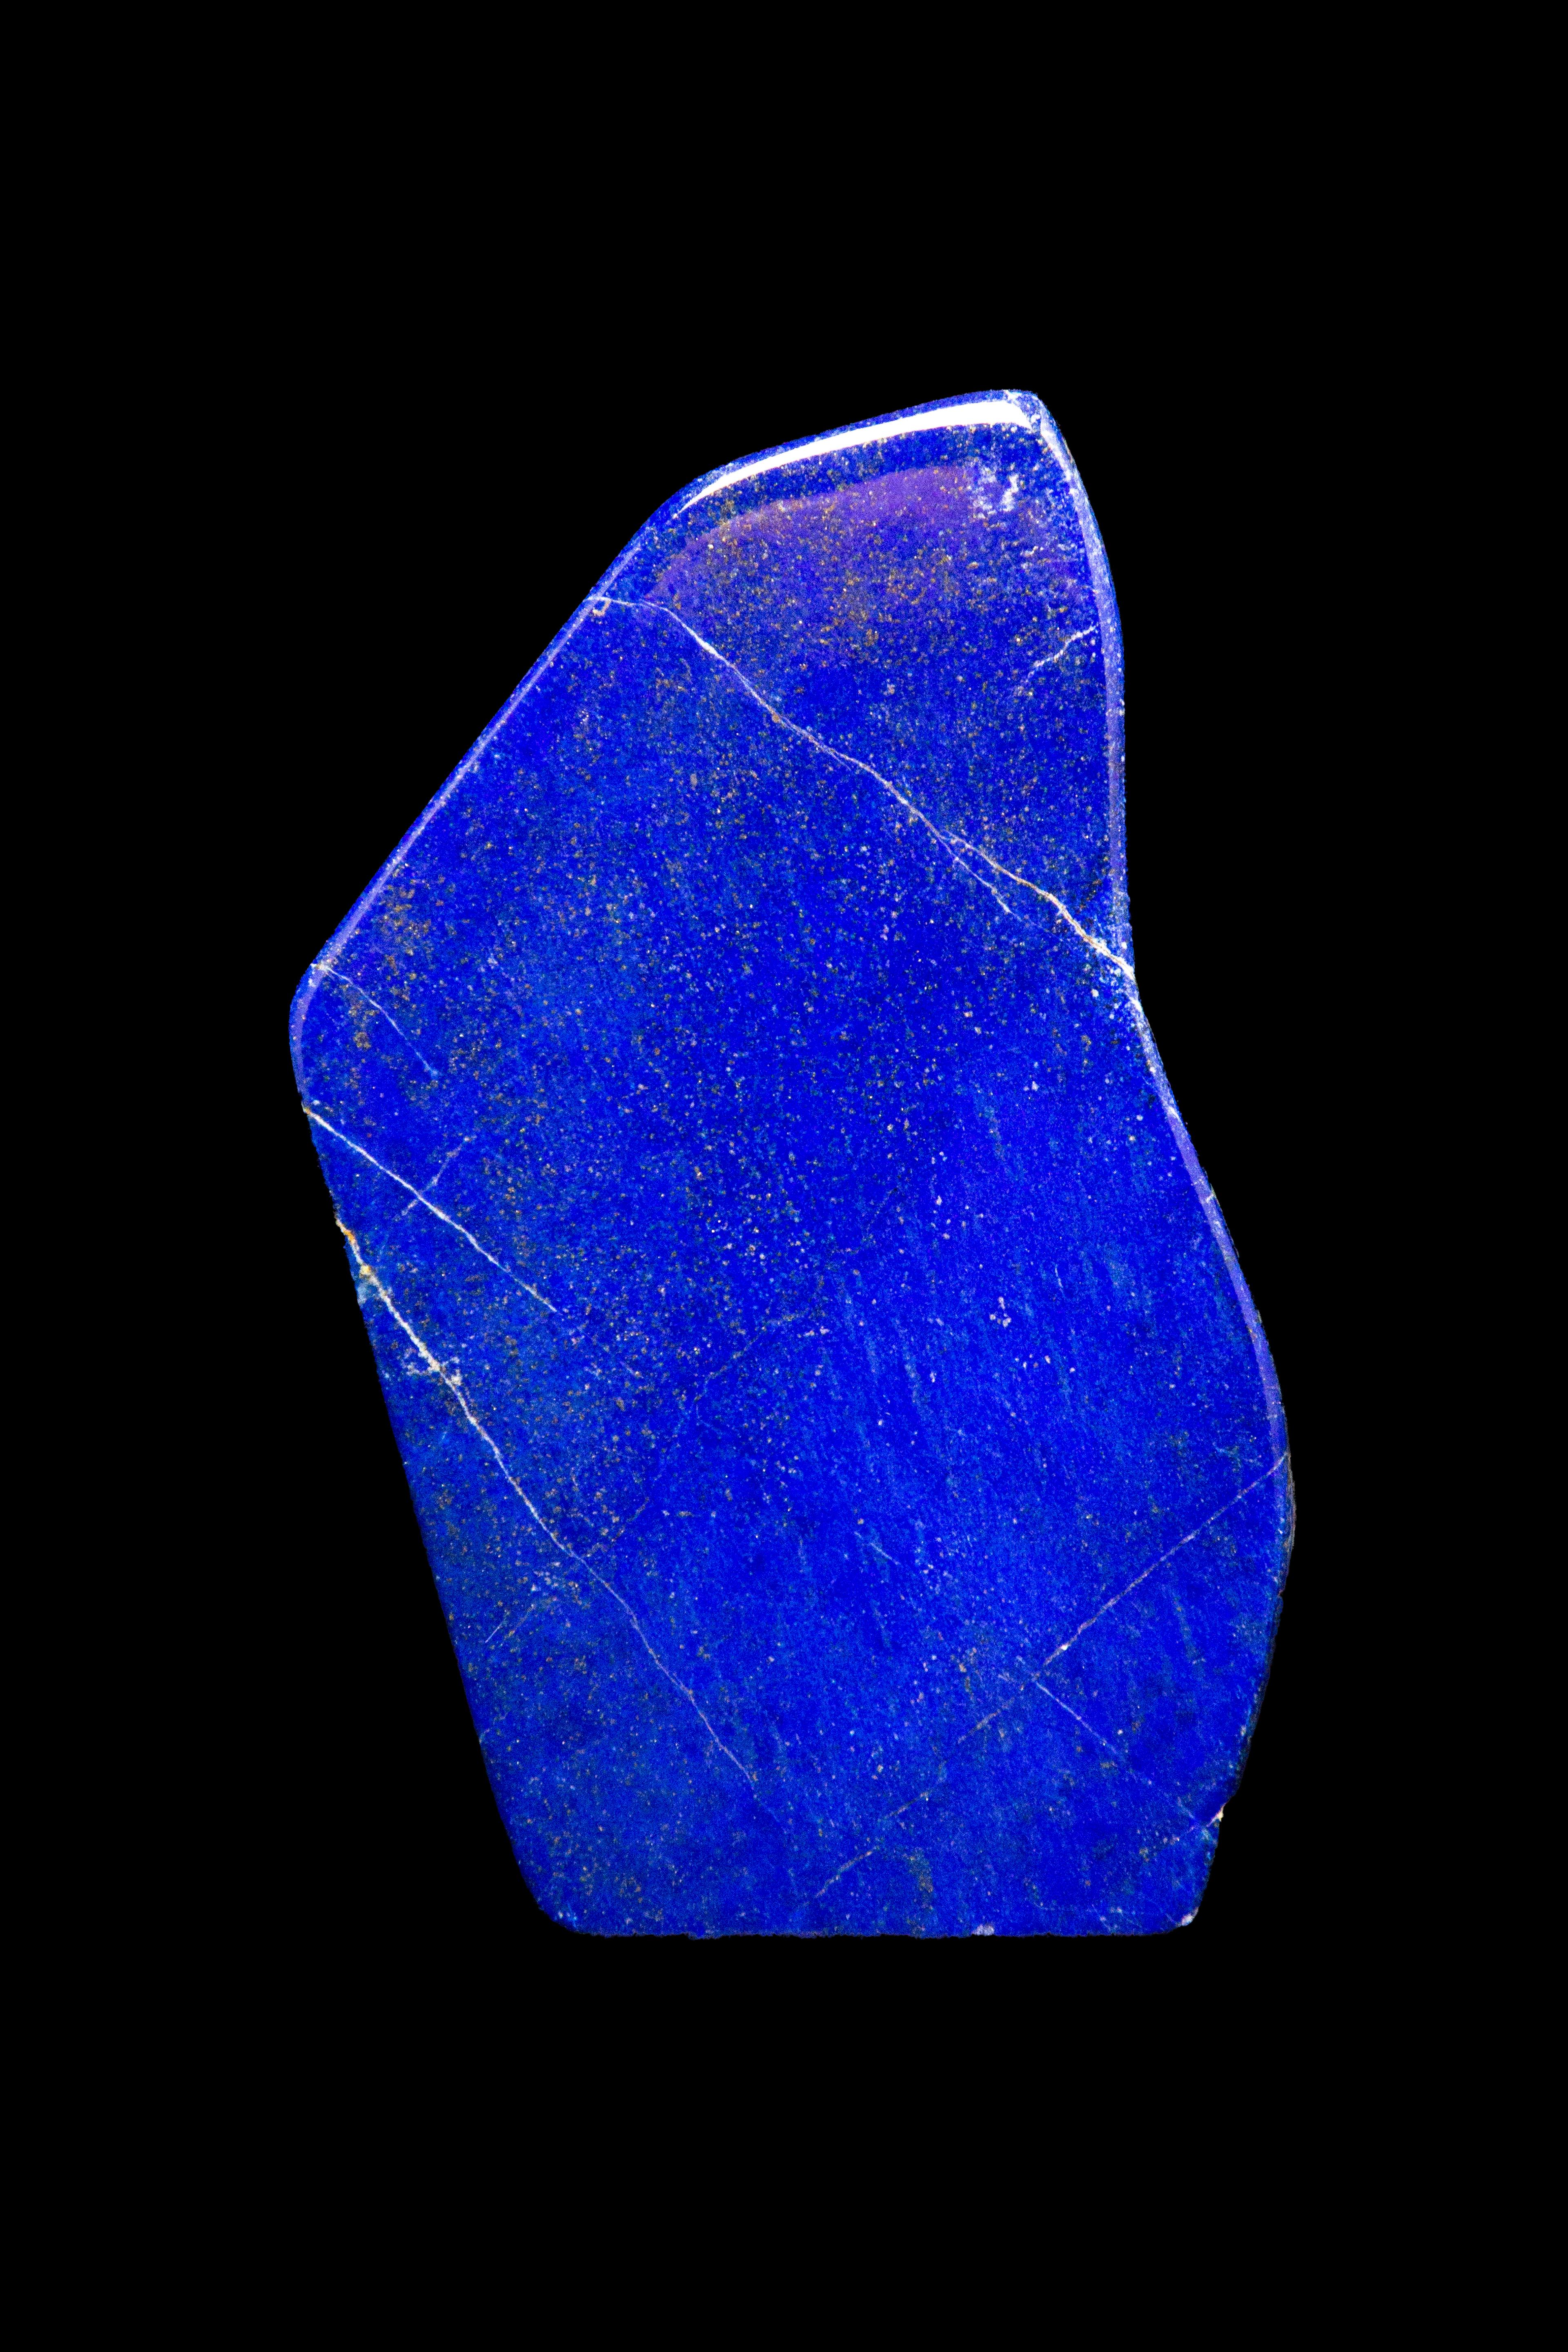 Beautifully polished lapis lazuli mineral specimen from Afghanistan. This semi-precious stone has been prized since antiquity due to its intense, beautiful blue coloring and golden speckles. It was also used in the fine arts, in a crushed powder